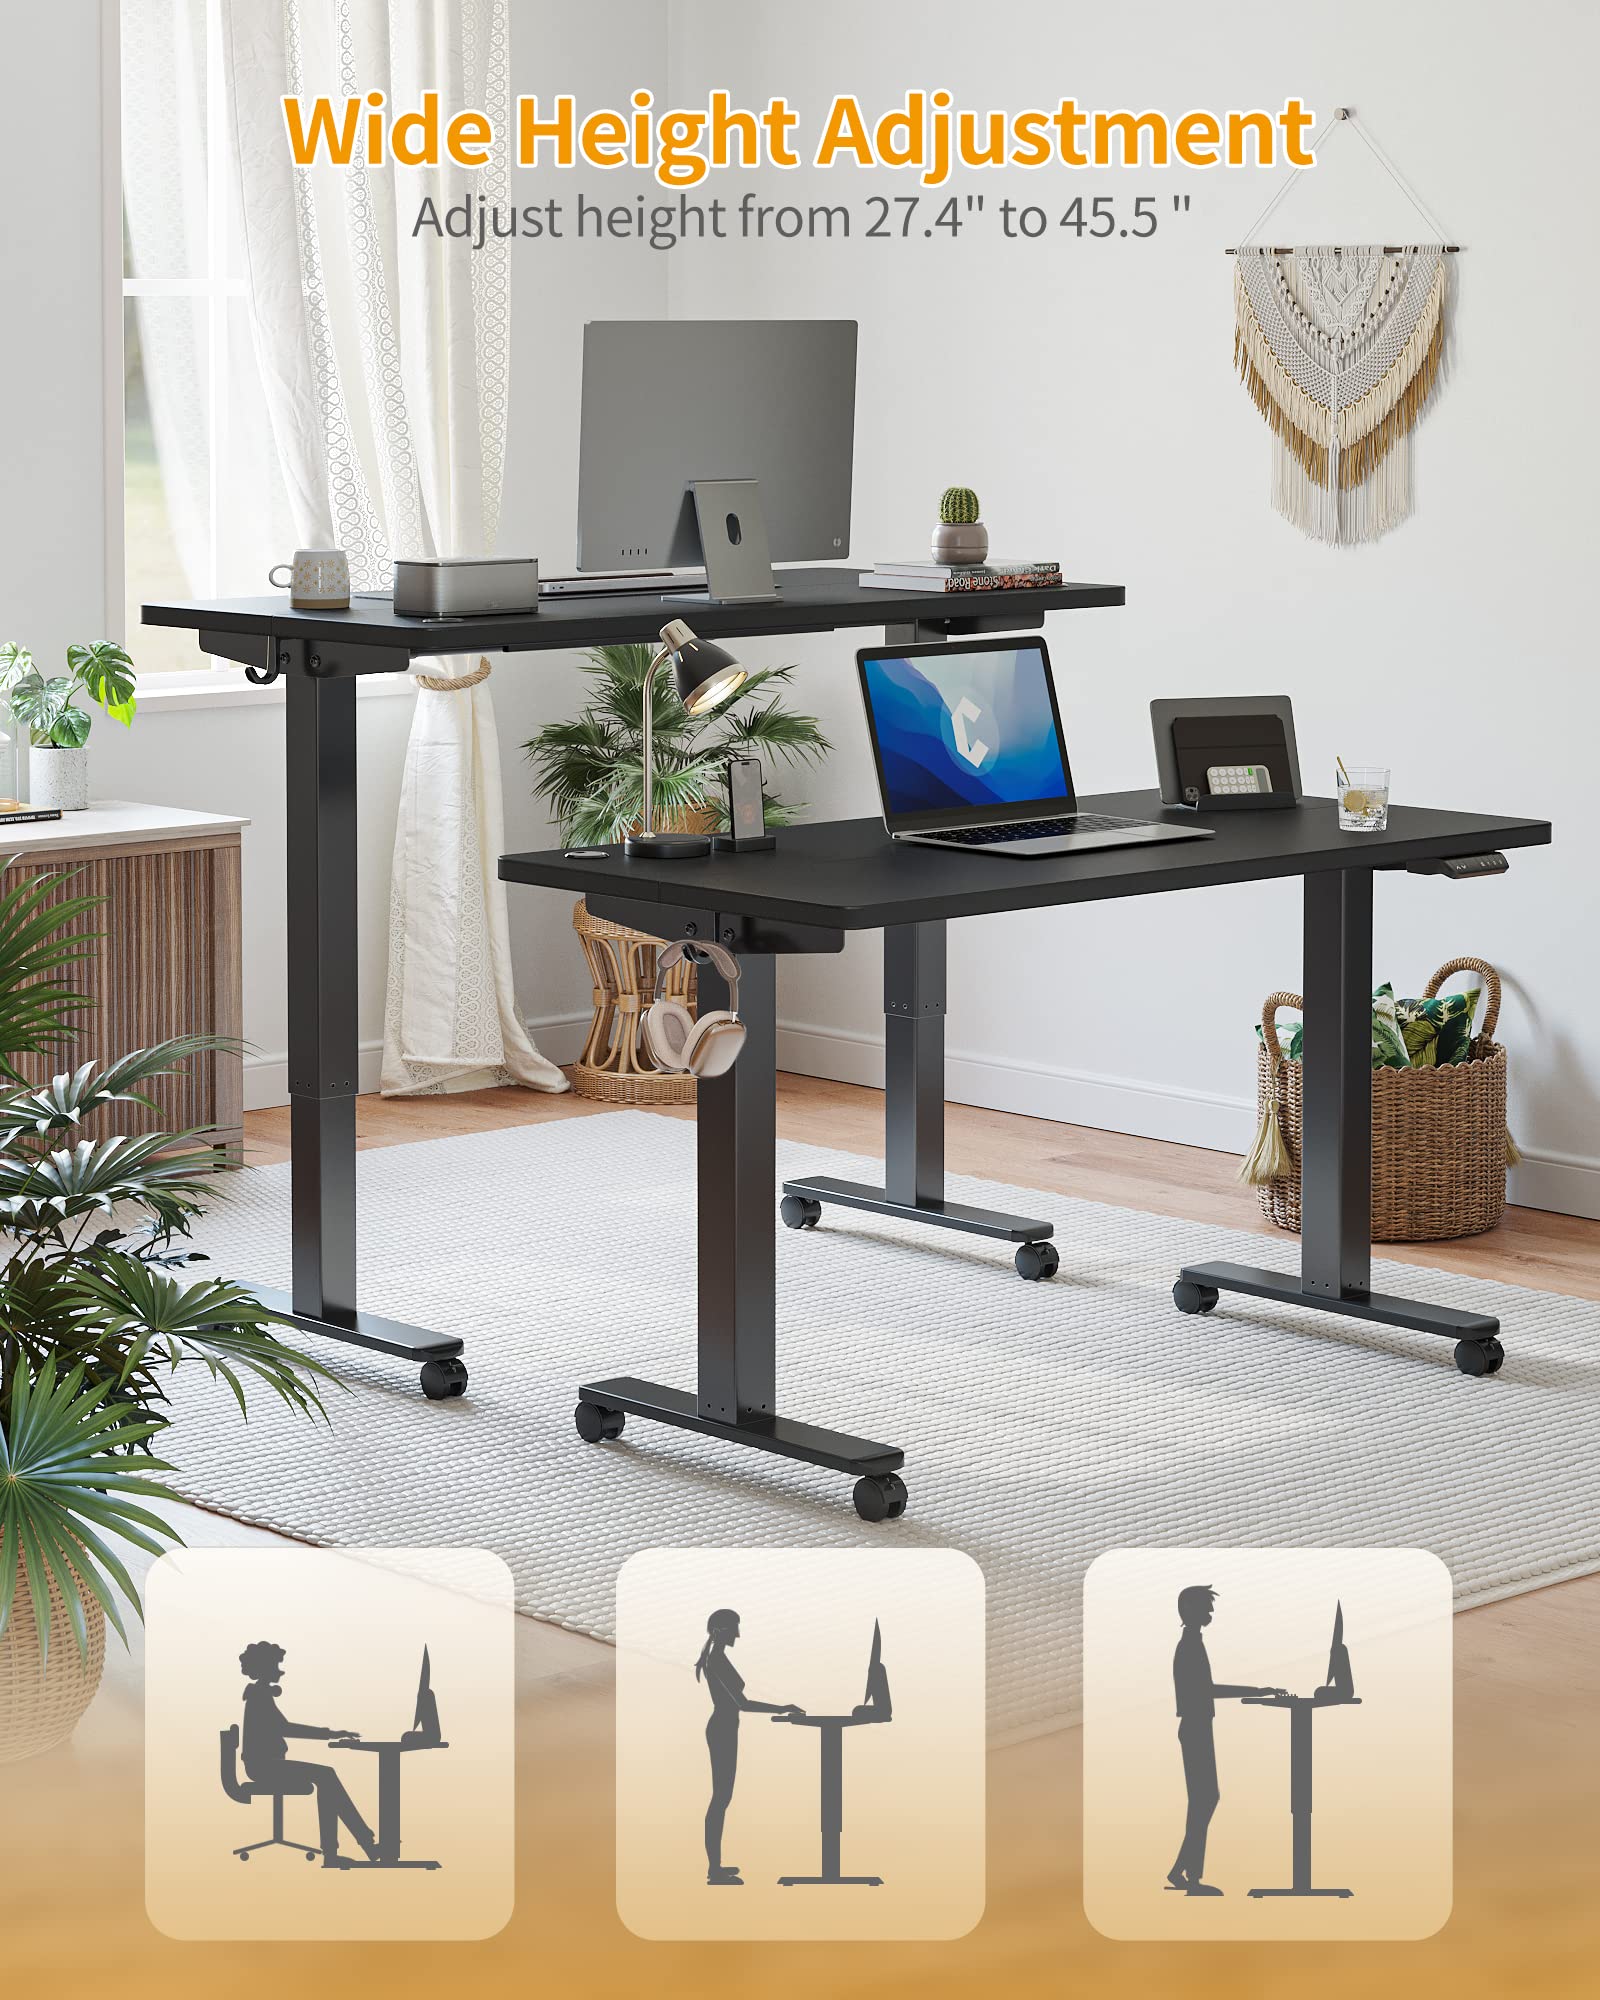 CubiCubi 55 x 24 Inch Standing Desk with Drawer, Electric Stand up Adjustable Height Electric Stand up Desk, Sit Stand Home Office Desk, Ergonomic Workstation Black Steel Frame/Rustic Brown Tabletop